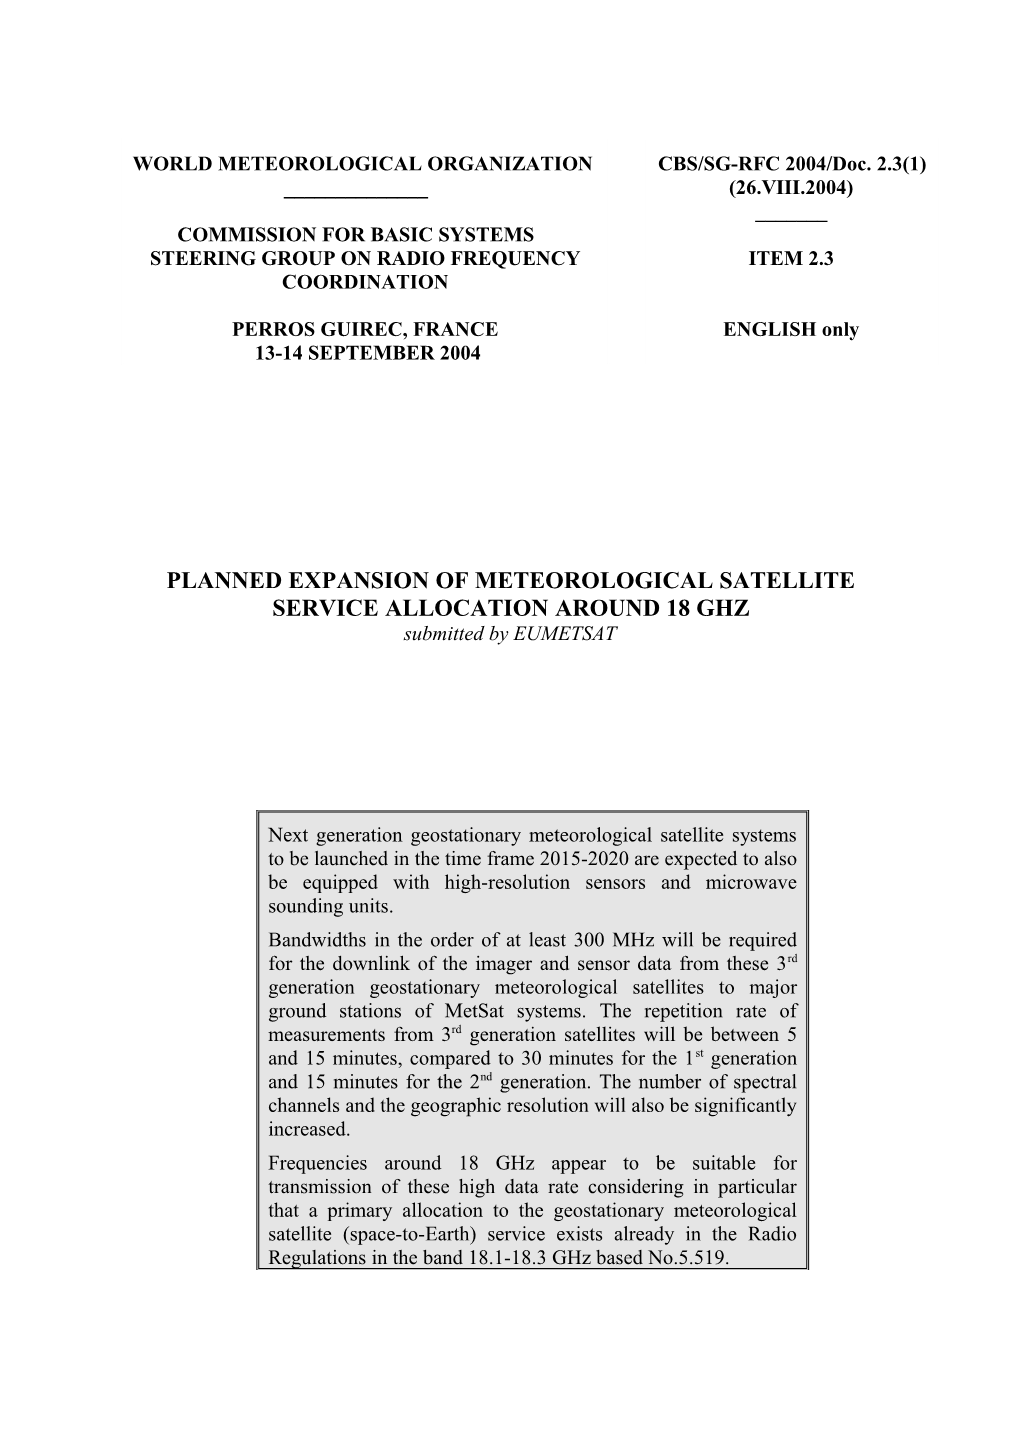 Planned Expansion of Meteorological Satellite Service Allocation Around 18 Ghz